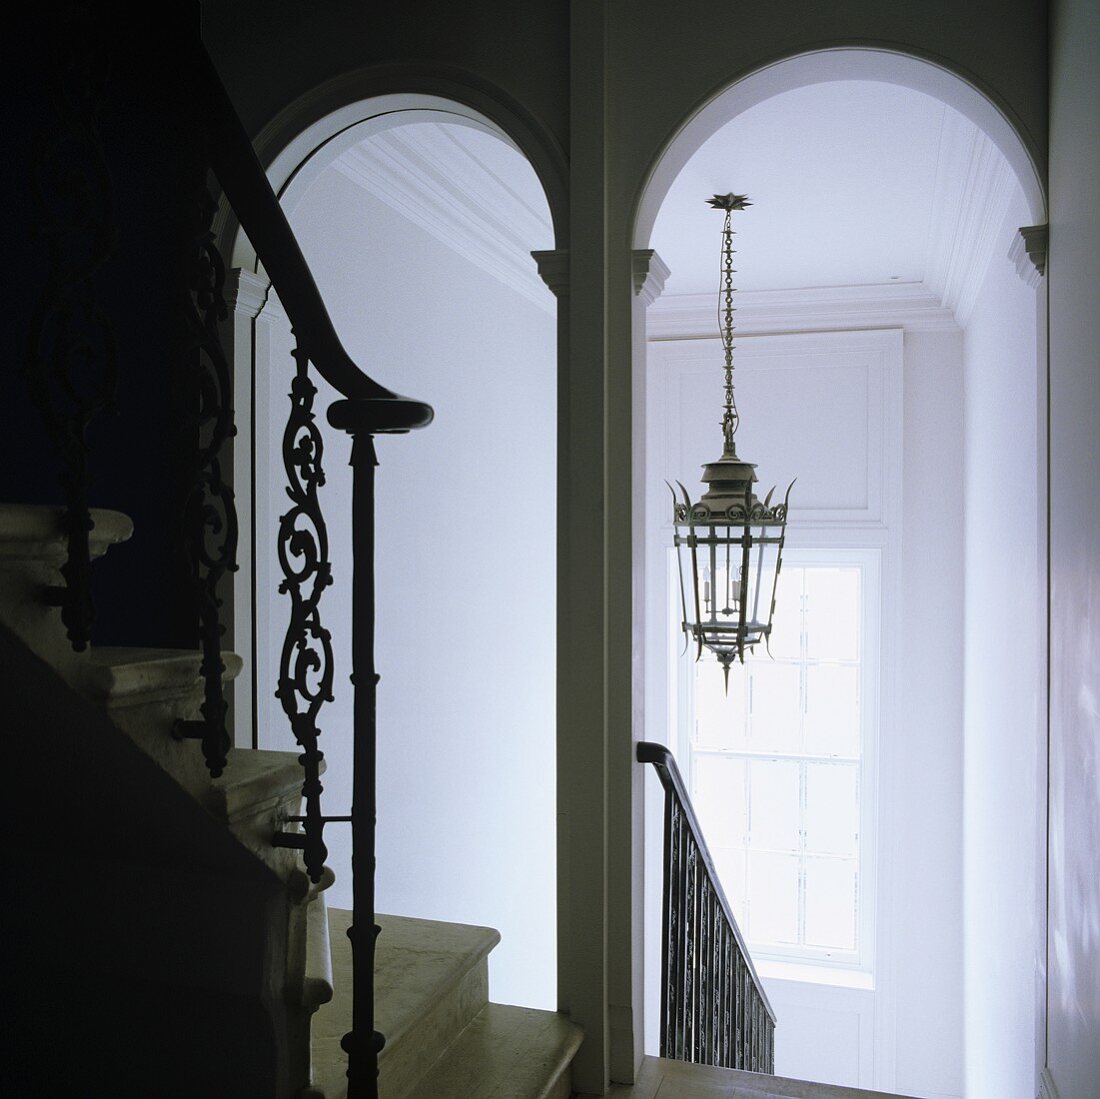 A white-painted stairway with archways and a view of a ceiling lantern